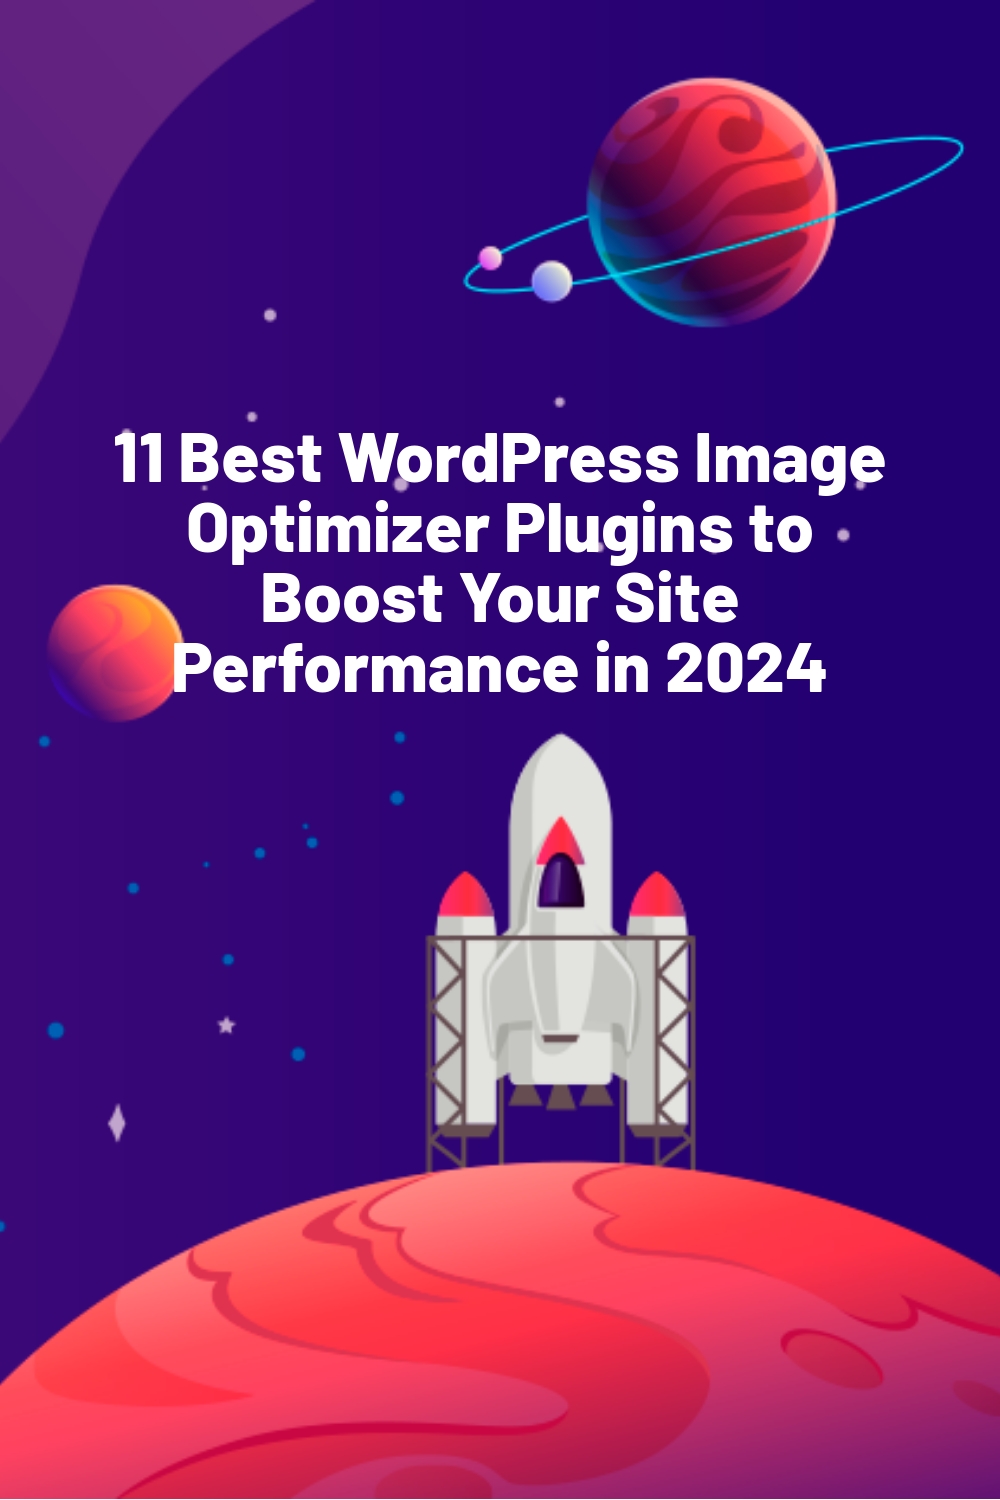 11 Best WordPress Image Optimizer Plugins to Boost Your Site Performance in 2024